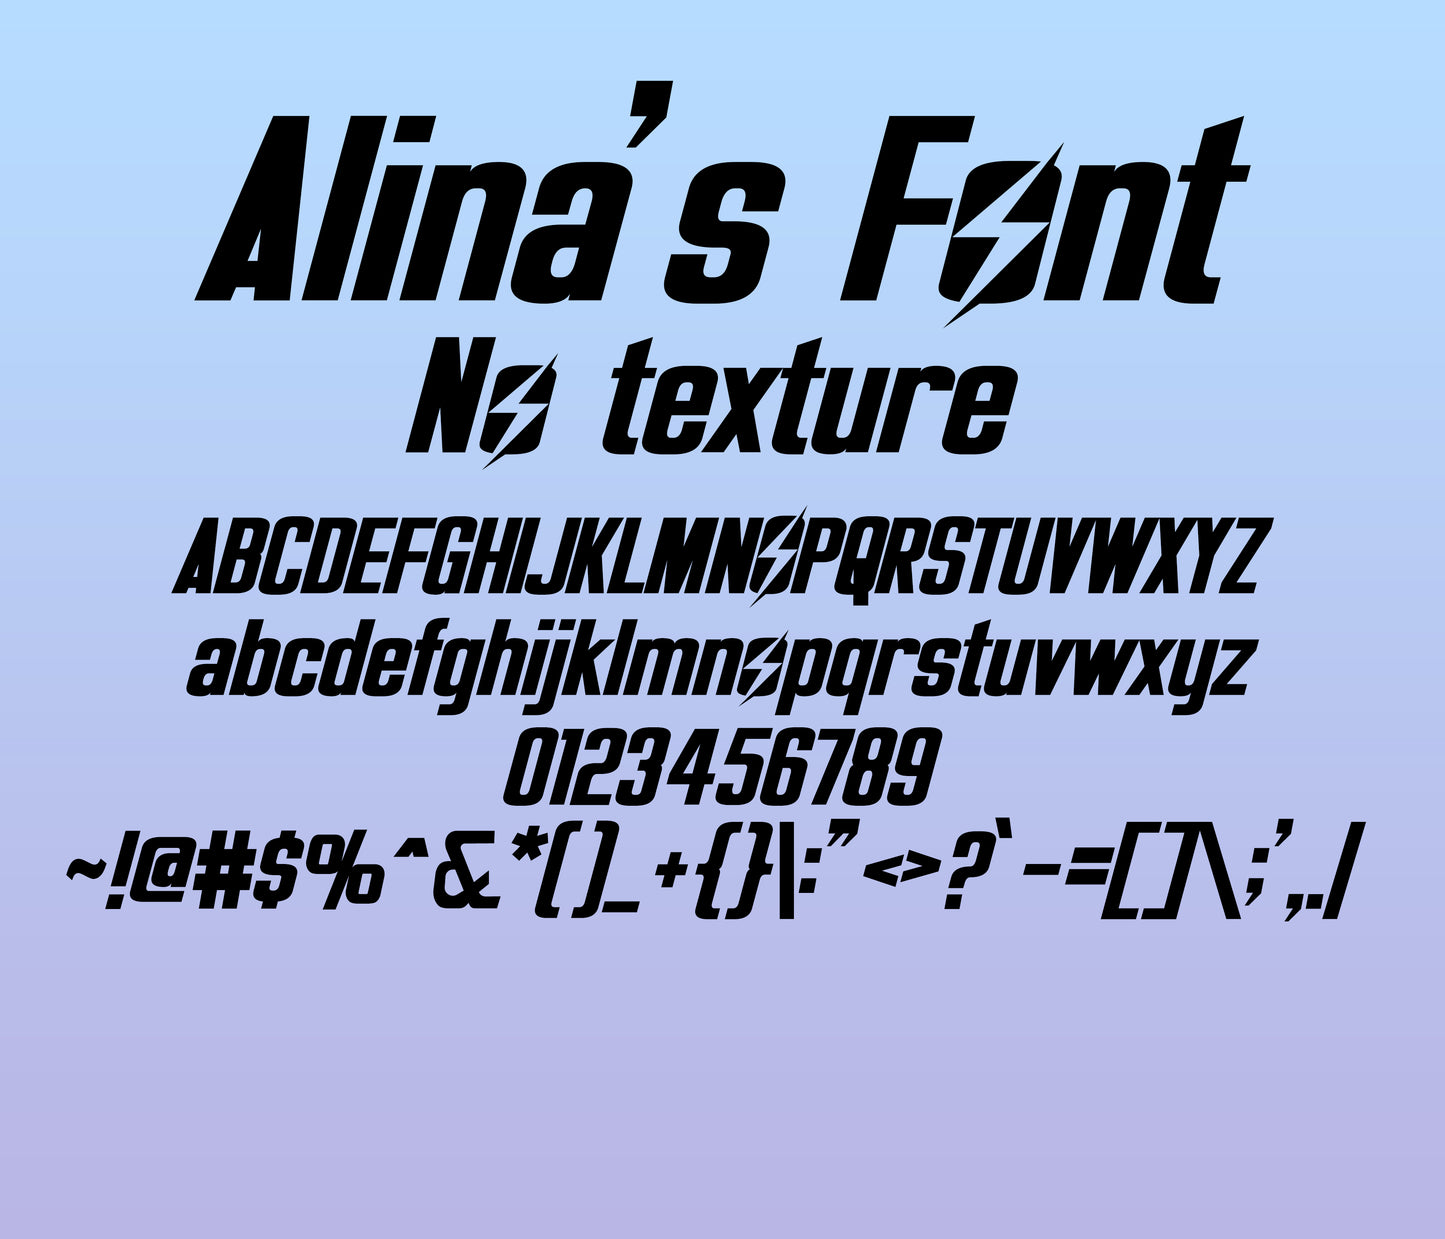 Fallout Textured Font